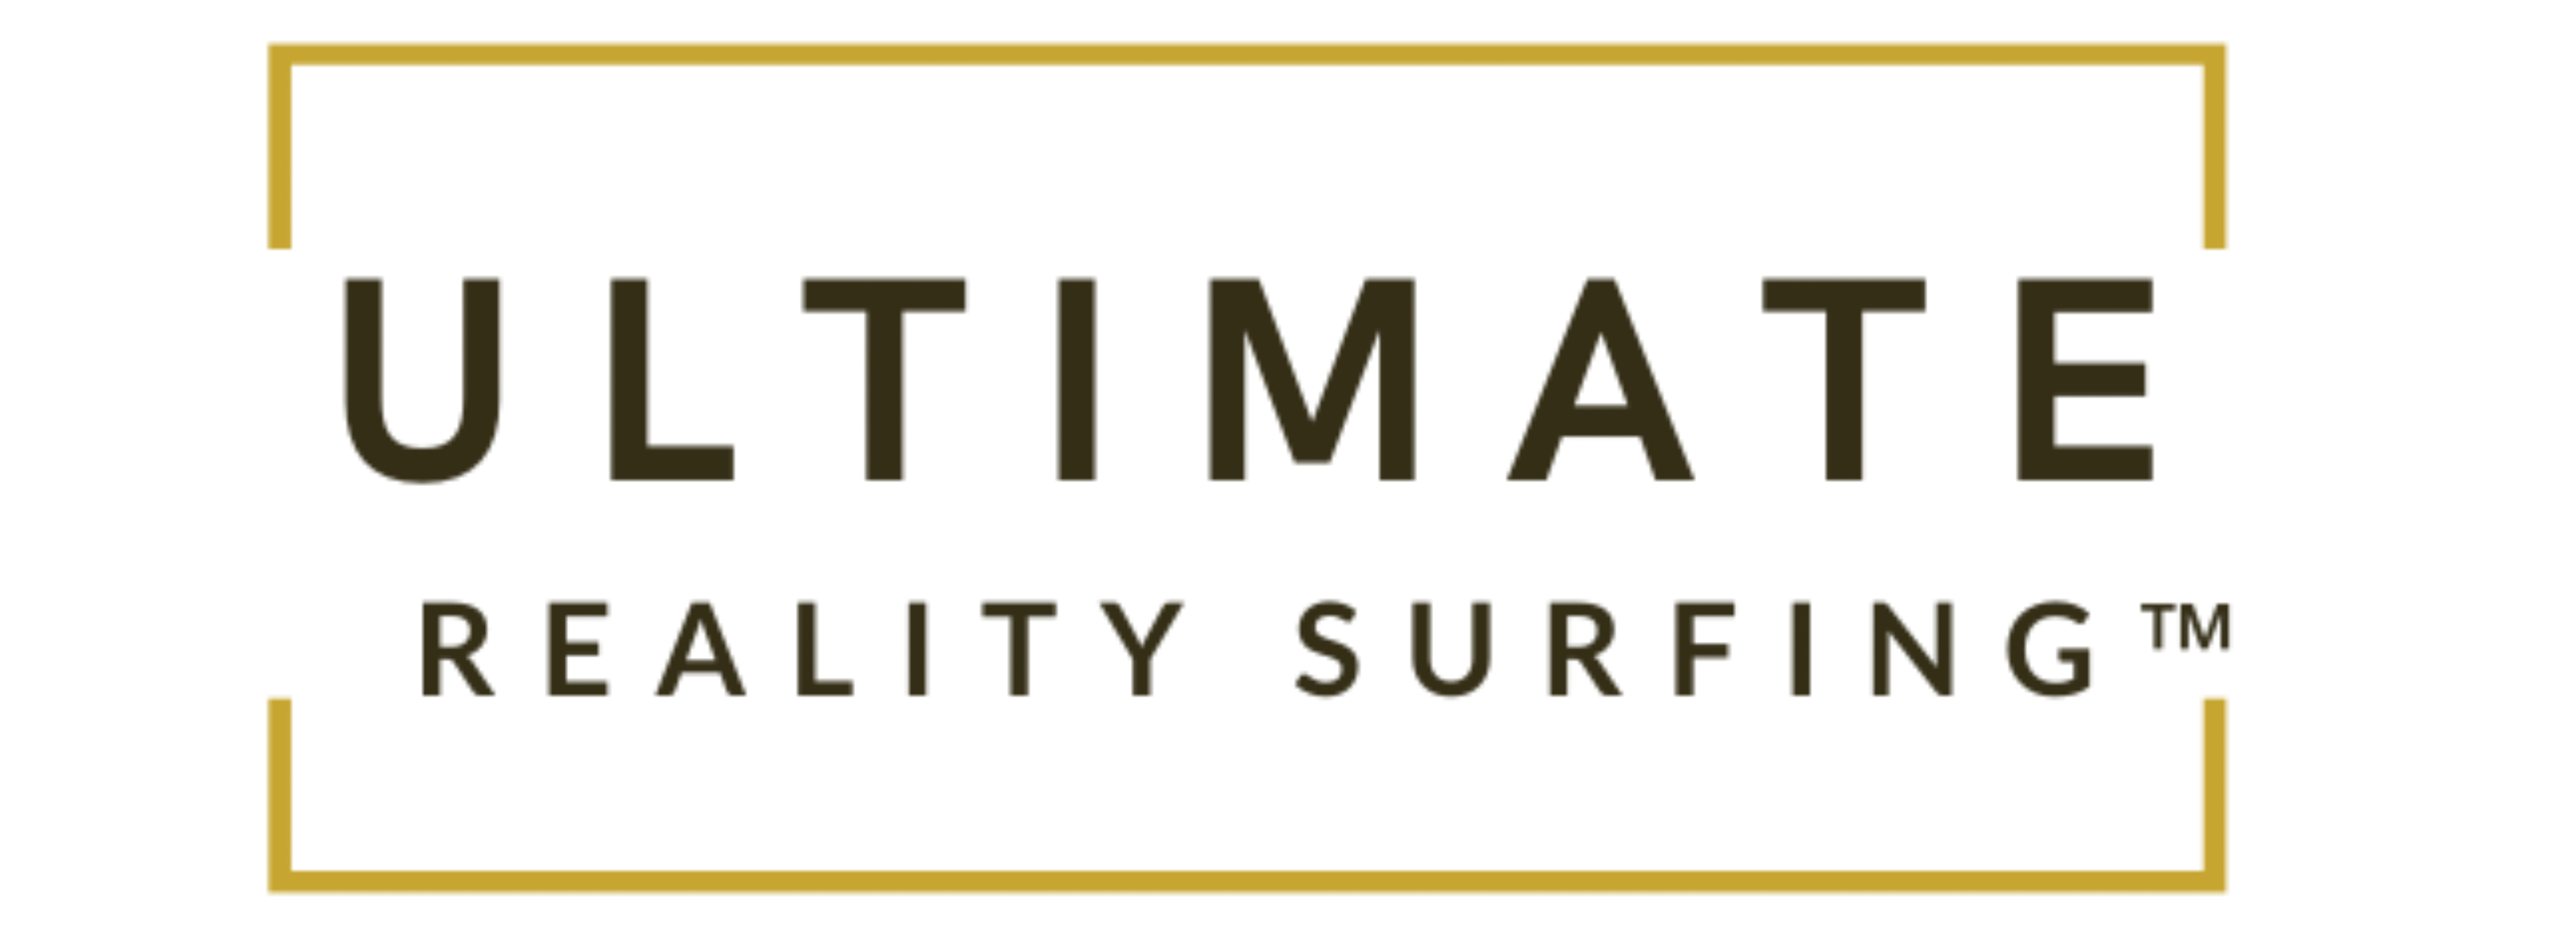 Ultimate Reality Surfing™